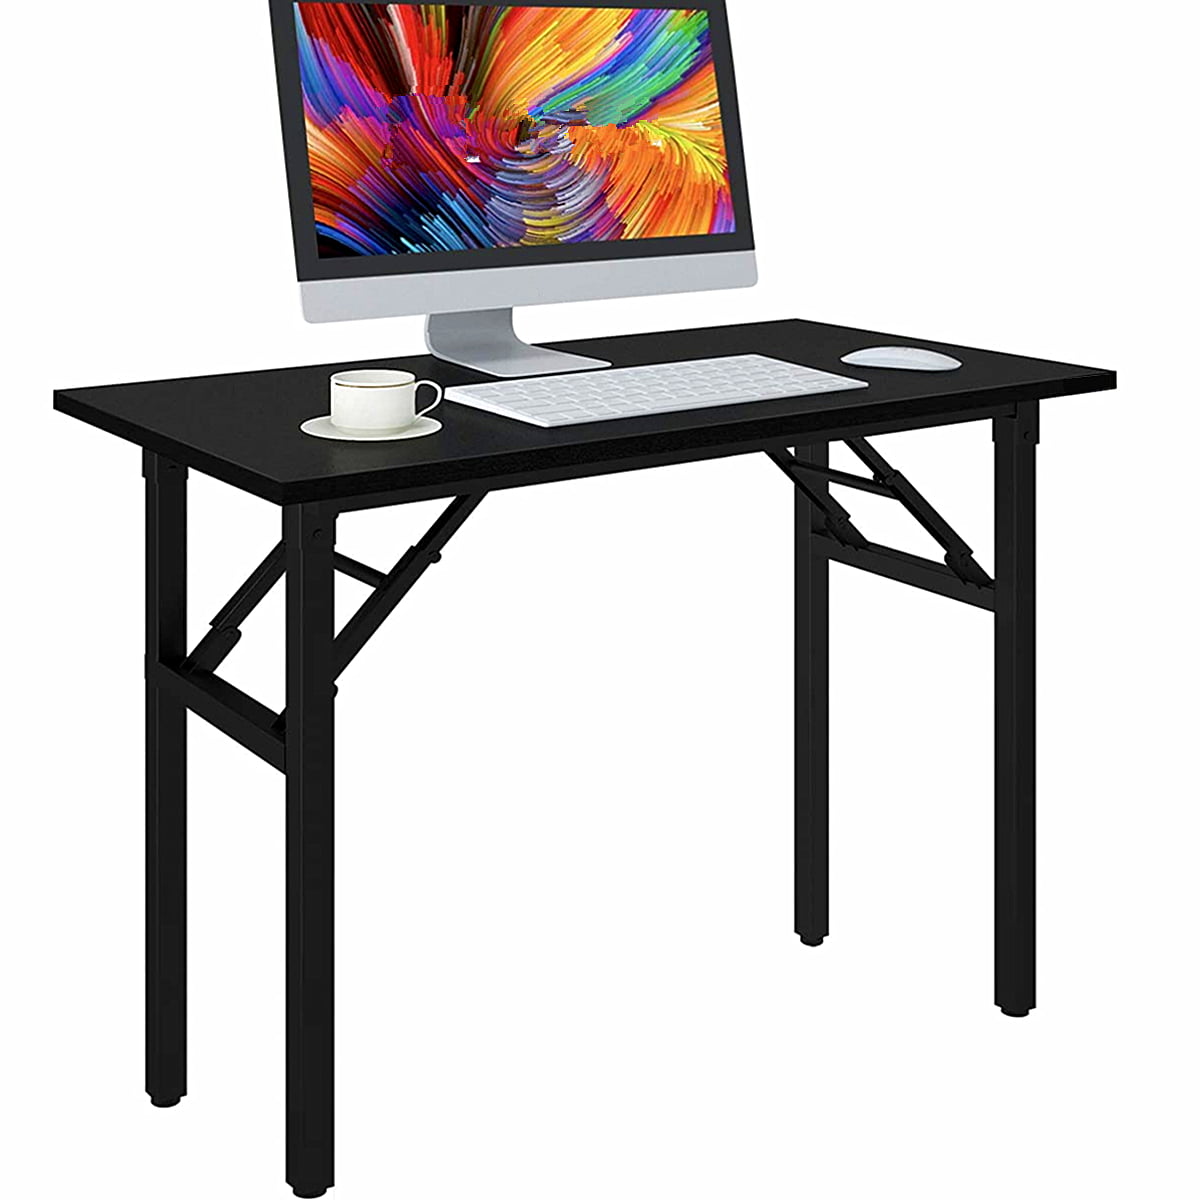 Multifunctional Study Writing Computer Desk Workstation for Home Office Use with Shelf 32 Inches Modern Laptop Table Cup & Headphone Holder Black 3 Steps Assembly Folding Desk for Small Spaces